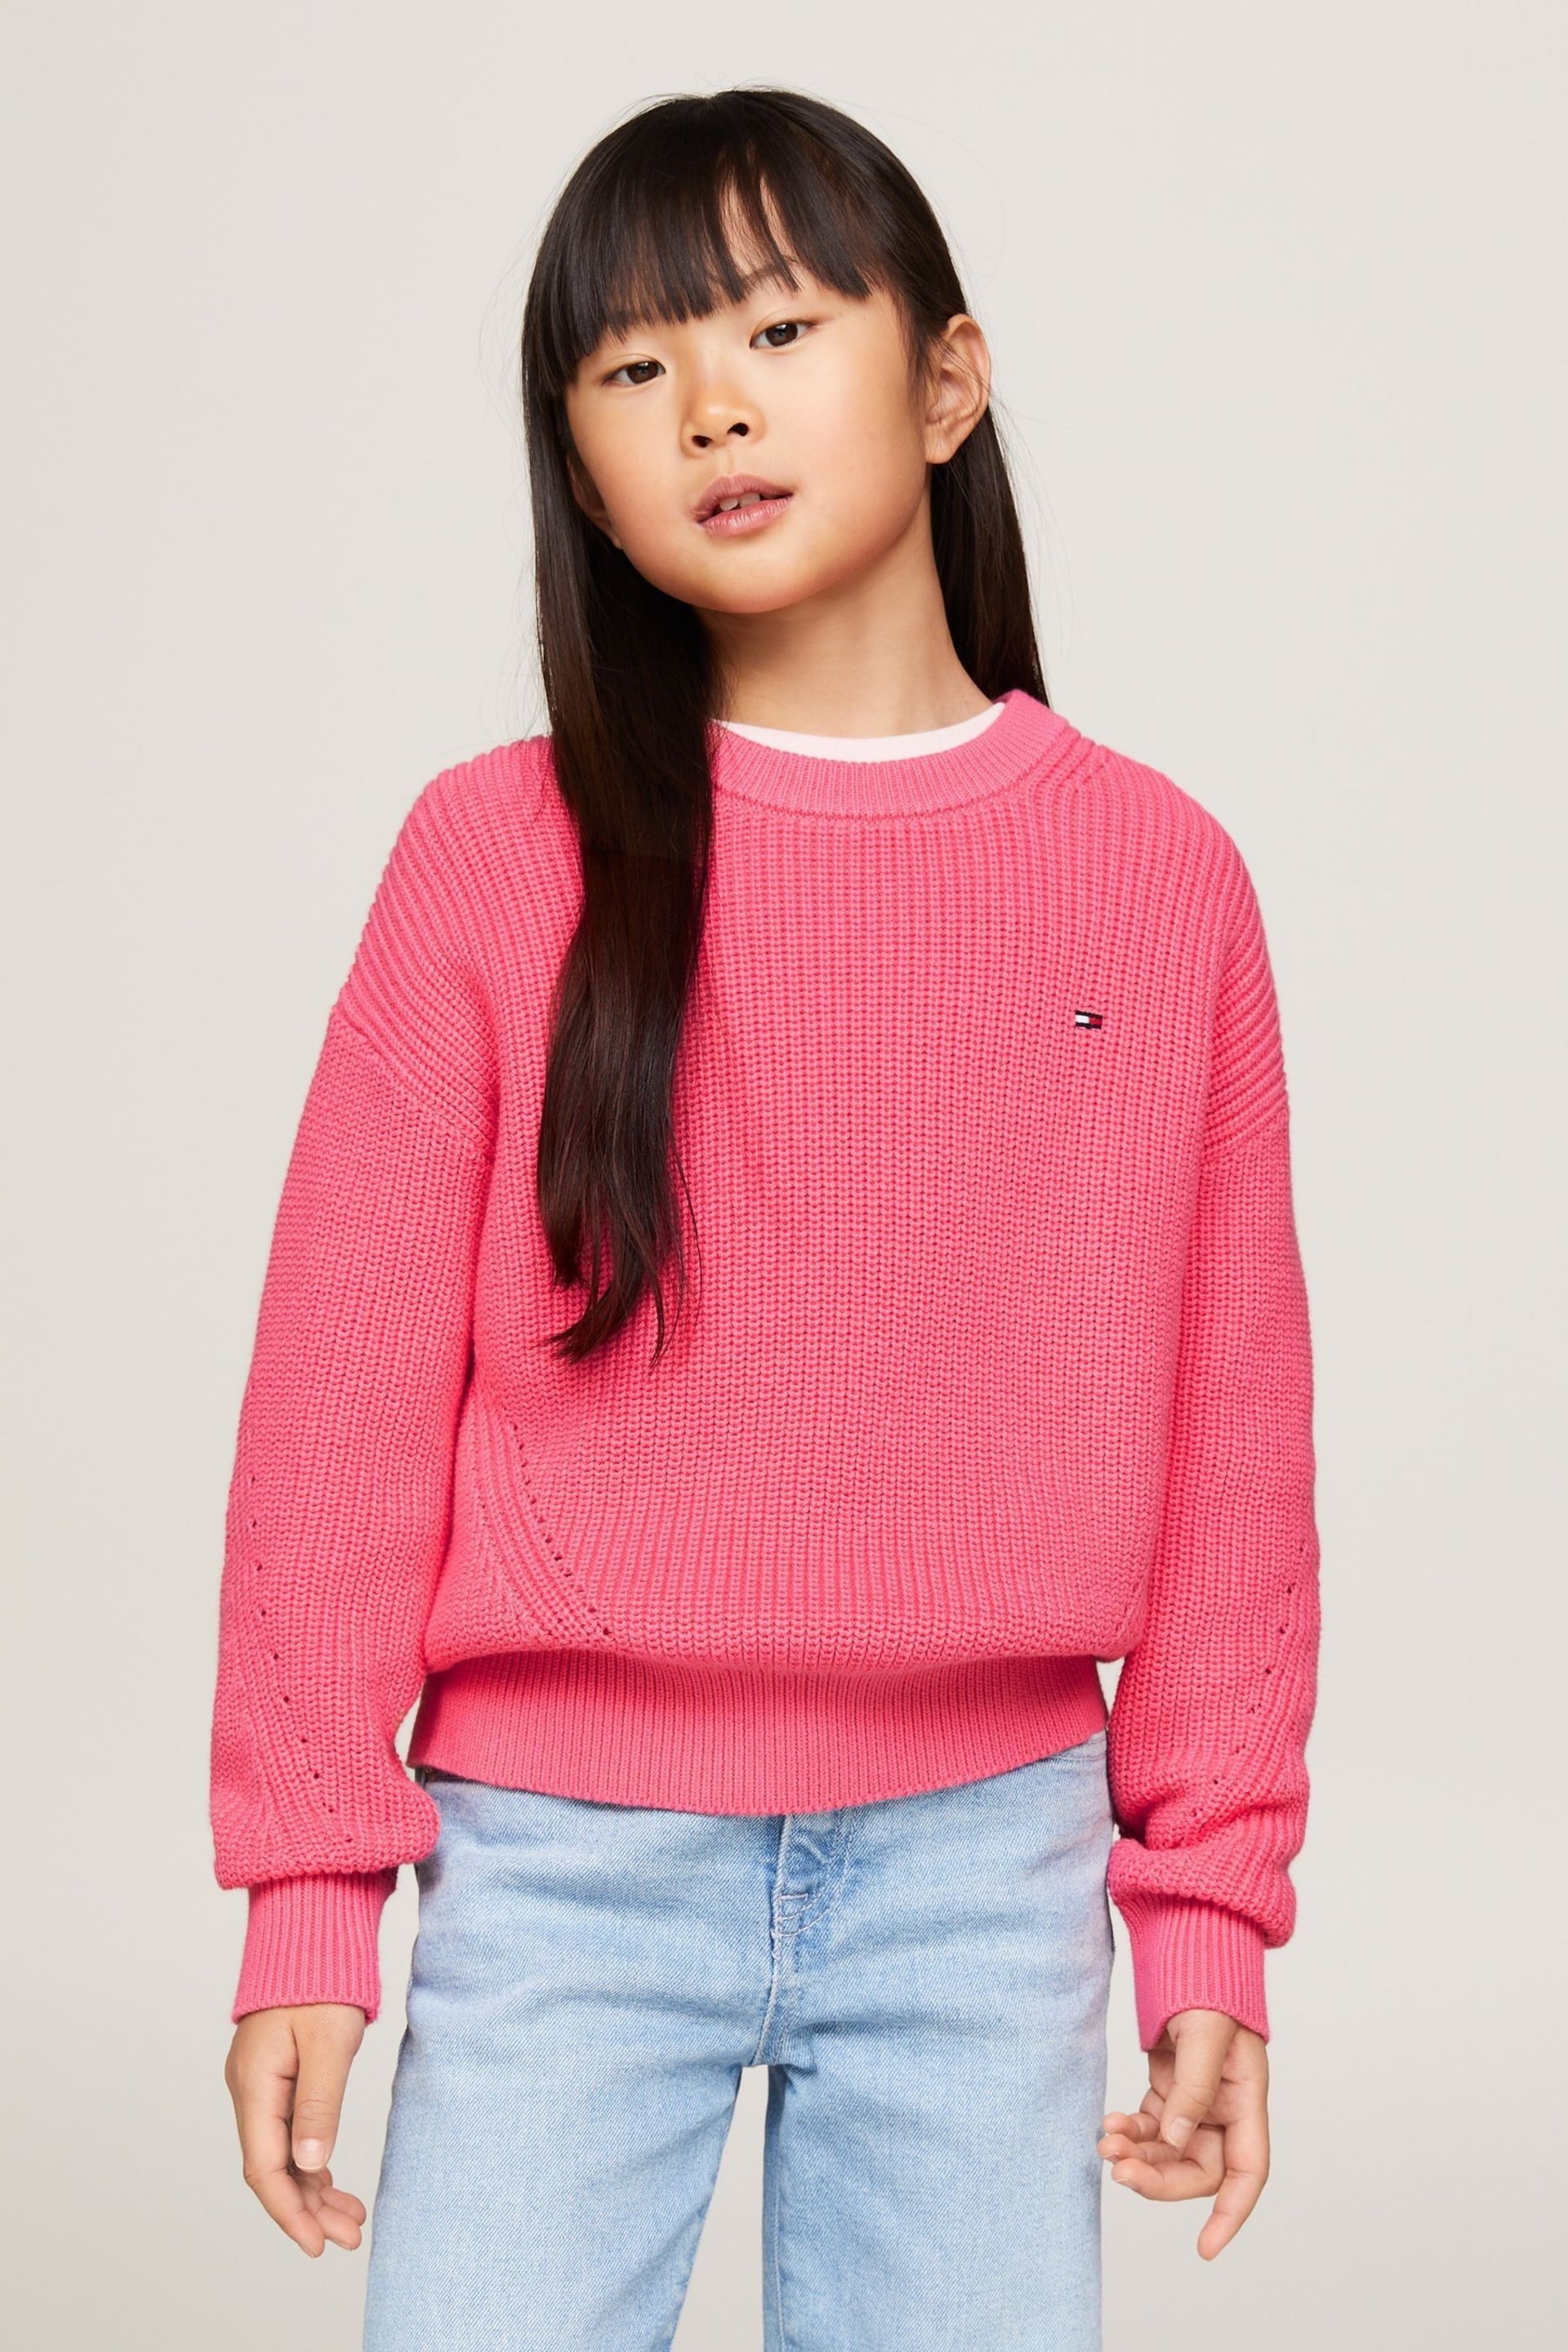 Tommy Hilfiger Pink Essential Rib Sweater - Image 1 of 6